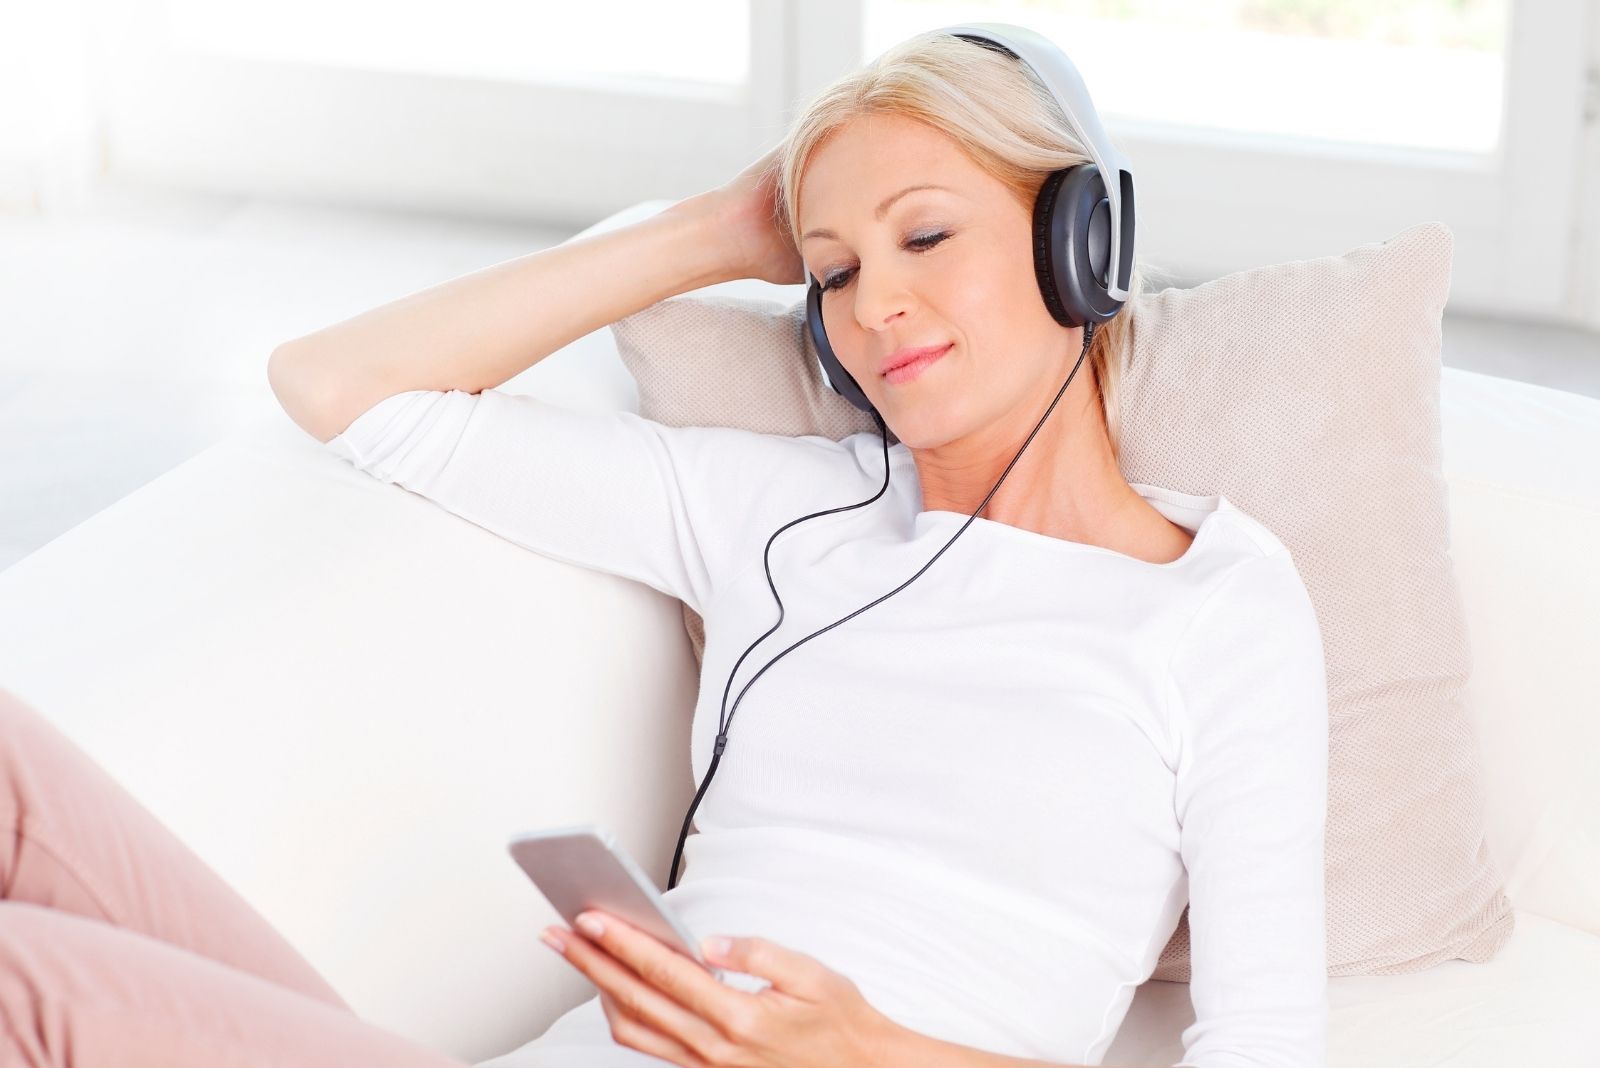 woman realxing holding a smartphone and listening with headphones on sitting on the couch near the windows